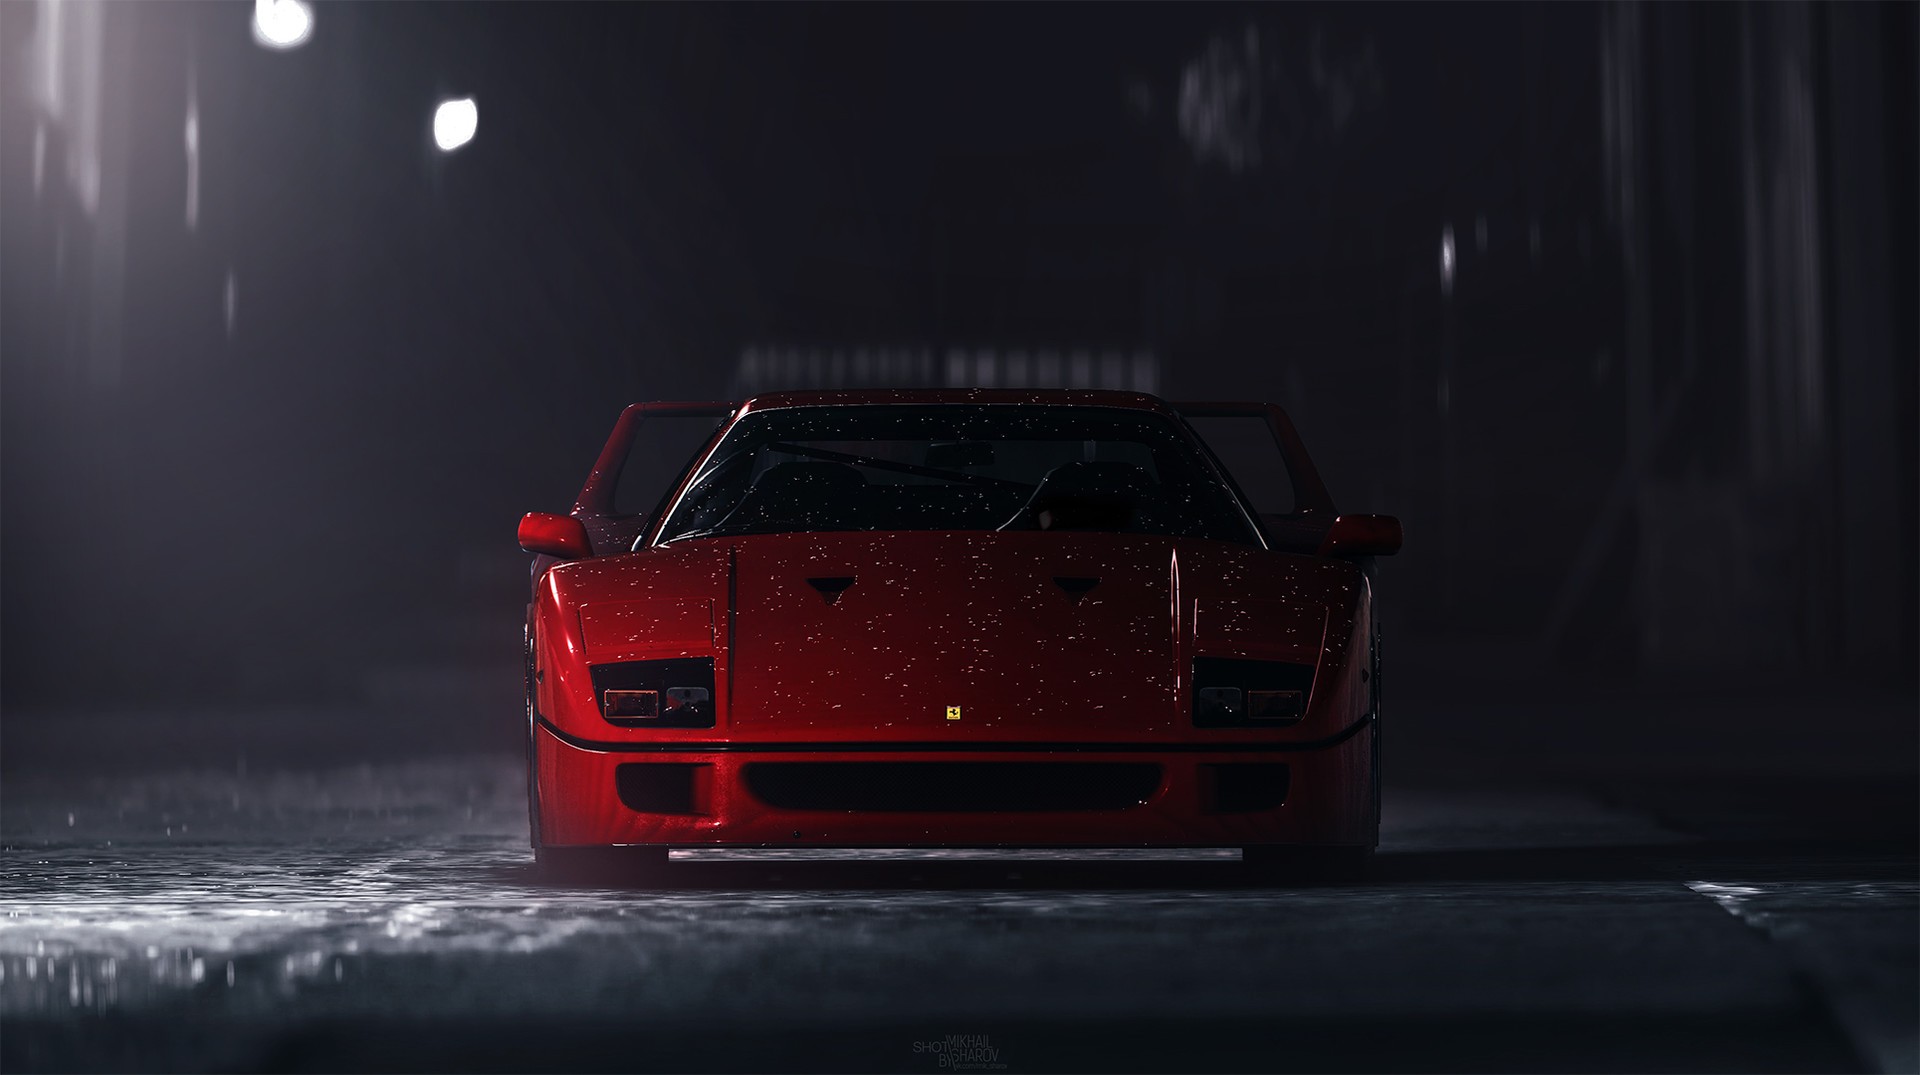 Need for Speed, Ferrari F40, Car Wallpapers HD / Desktop and Mobile